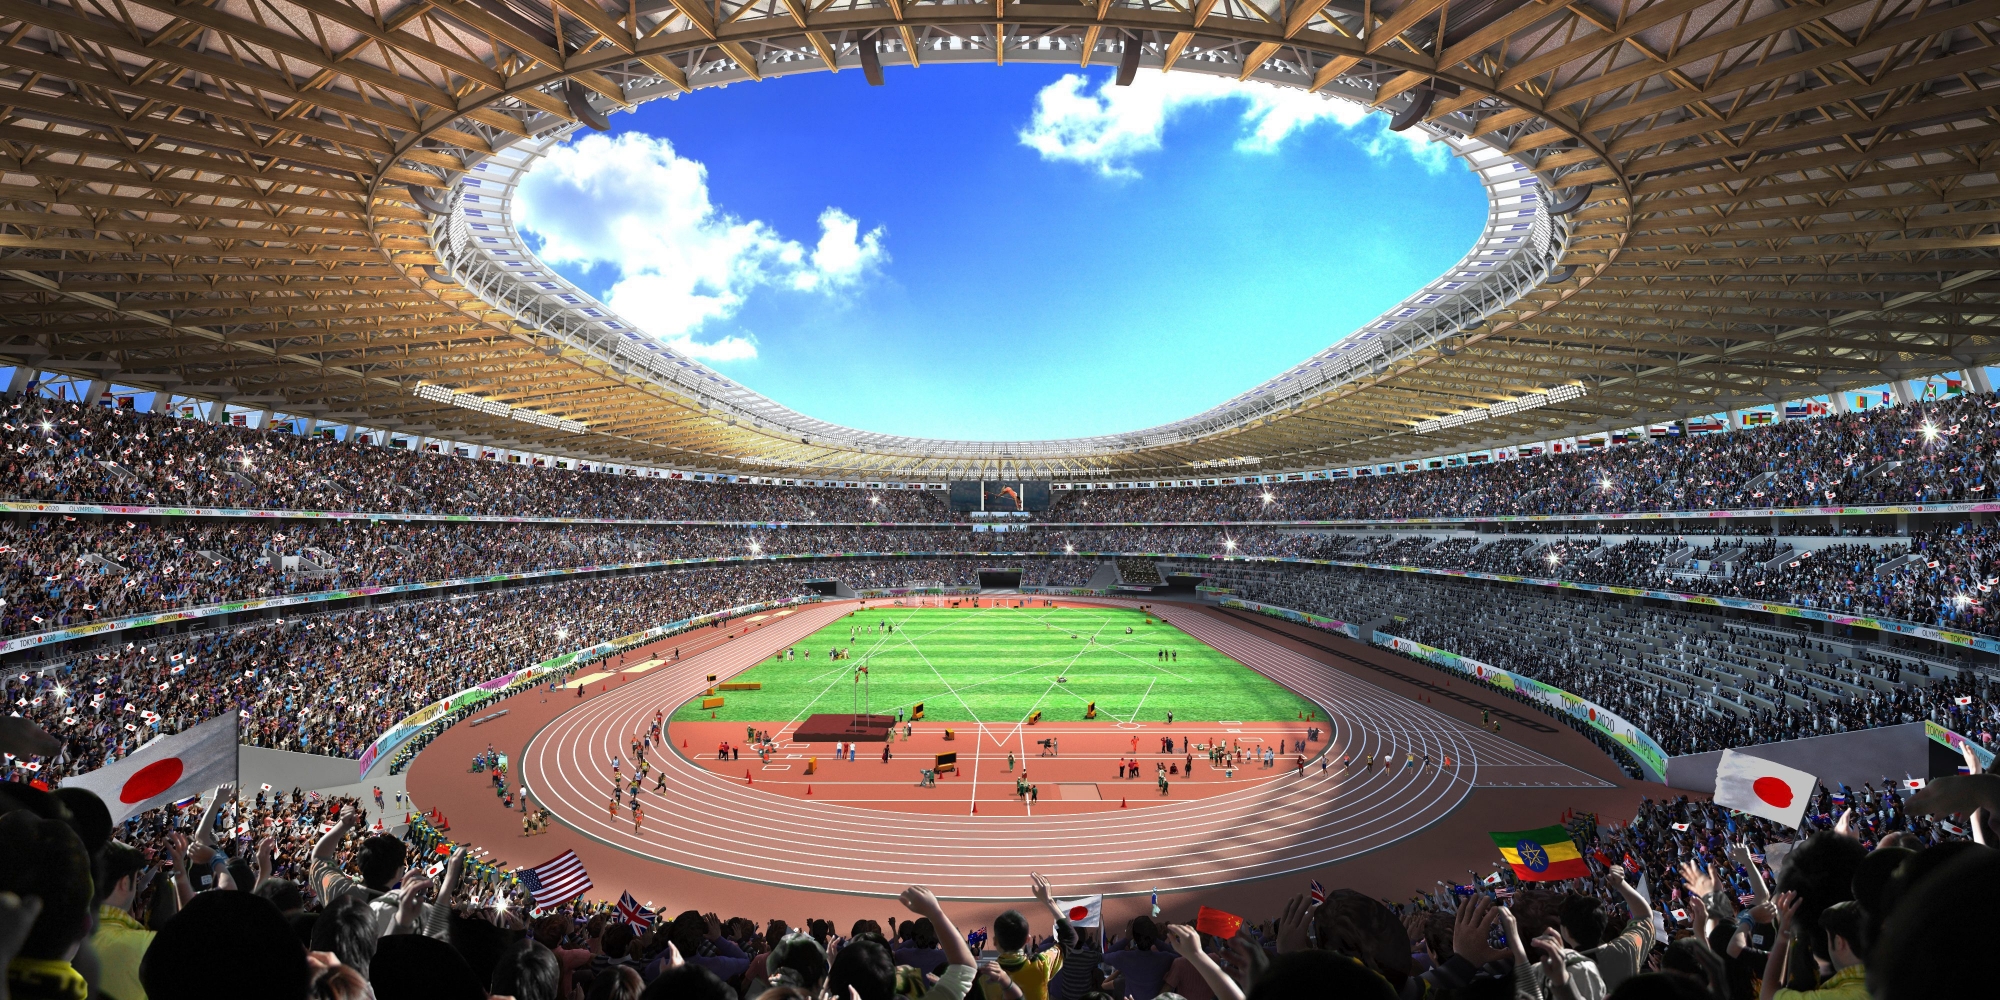 epa05078760 An artistic concept image released on 22 December 2015 shows the interior of the new designed main stadium for the 2020 Tokyo Olympics in Tokyo, Japan. Japan on 22 December 2015 selected the new design for the main stadium for the 2020 Tokyo Olympics five months after Prime Minister Shinzo Abe scrapped a controversial, earlier plan due to a surging cost. A government panel has picked the new design by award-winning Japanese architect Kengo Kuma and his plan will incur a total construction cost of 149 billion yen (1.2 billion dollars), compared with 265 billion yen for a cancelled previous design by Iraqi-British architect Zaha Hadid. The project will be led by Japanese major construction company Taisei, which won the bid to build the main venue of the Tokyo Games, the panel said.  EPA/JAPAN SPORT COUNCIL  HANDOUT EDITORIAL USE ONLY/NO SALES JAPAN OLYMPICS TOKYO STADIUM